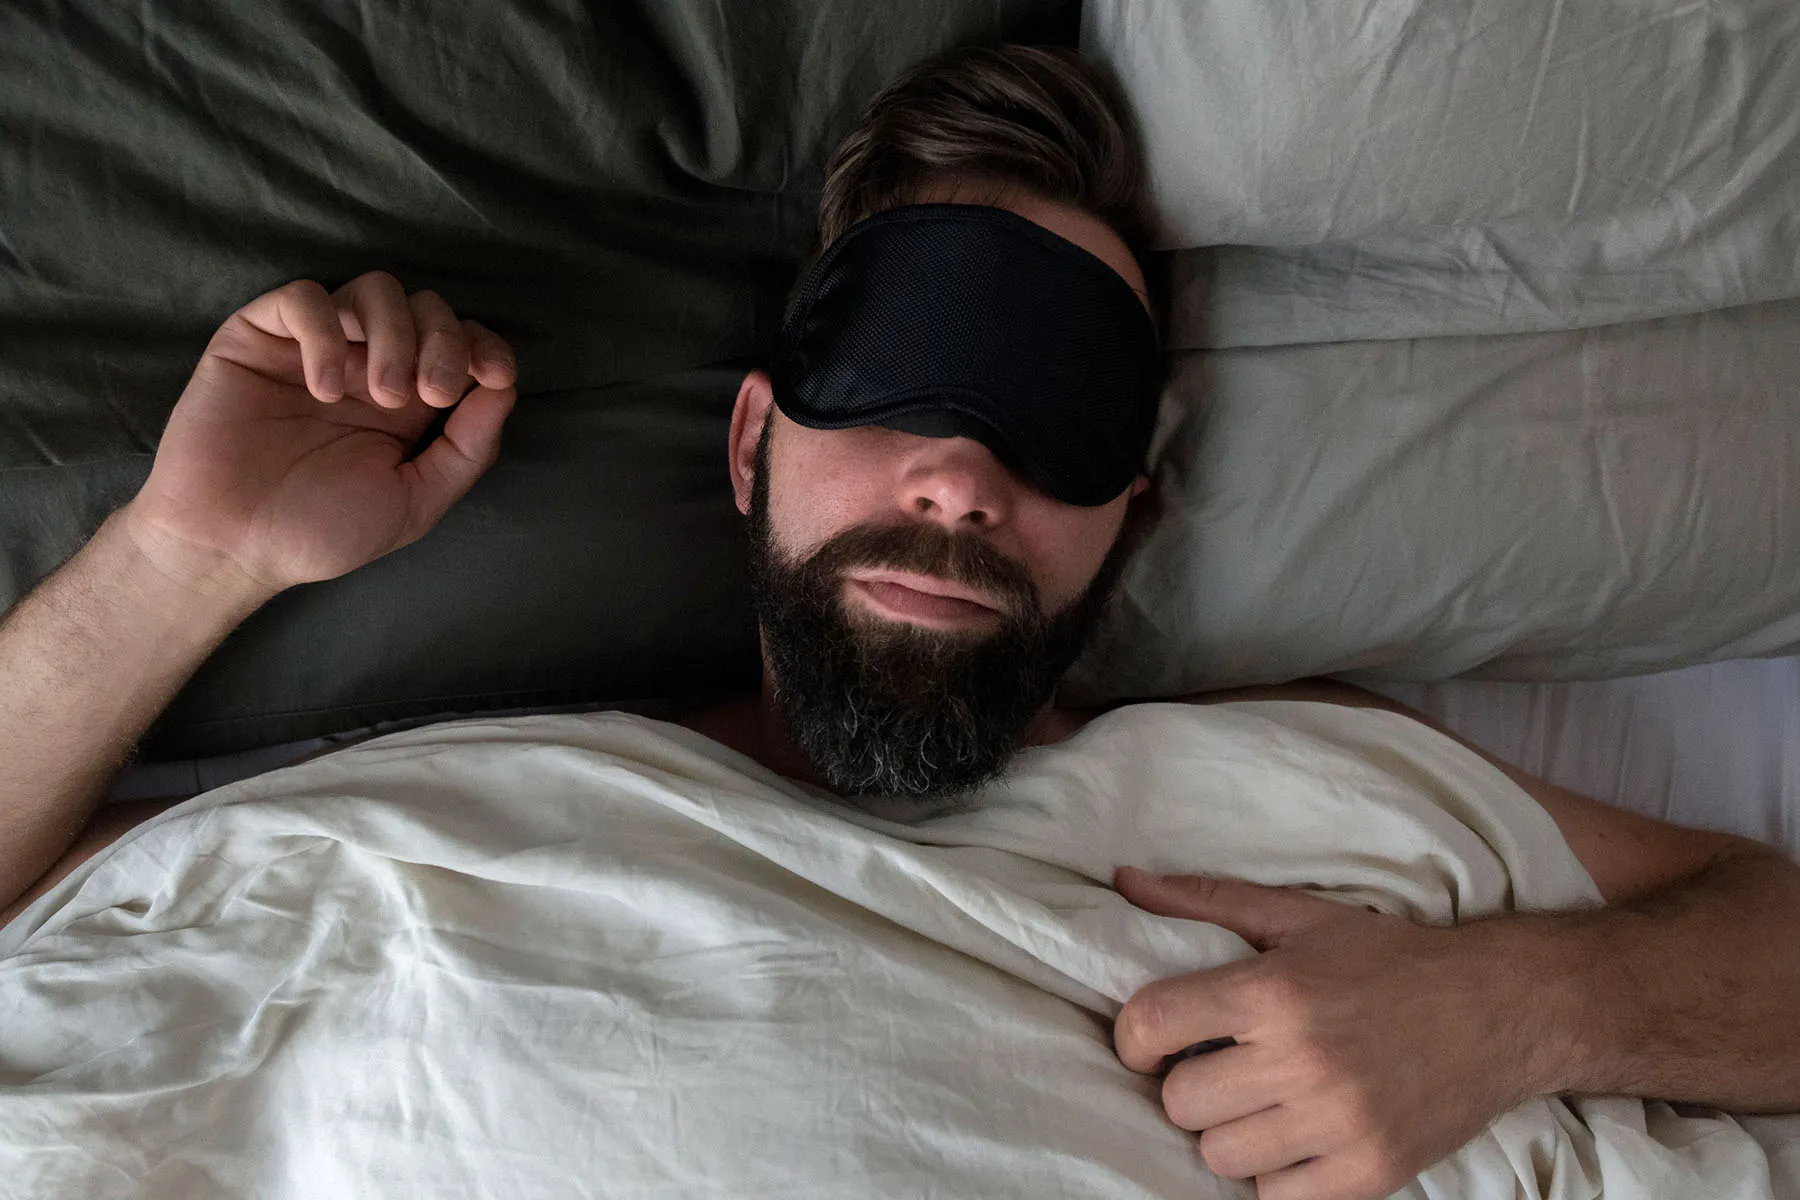 Is That Hum Keeping You Up? Here’s How to Get Better Sleep